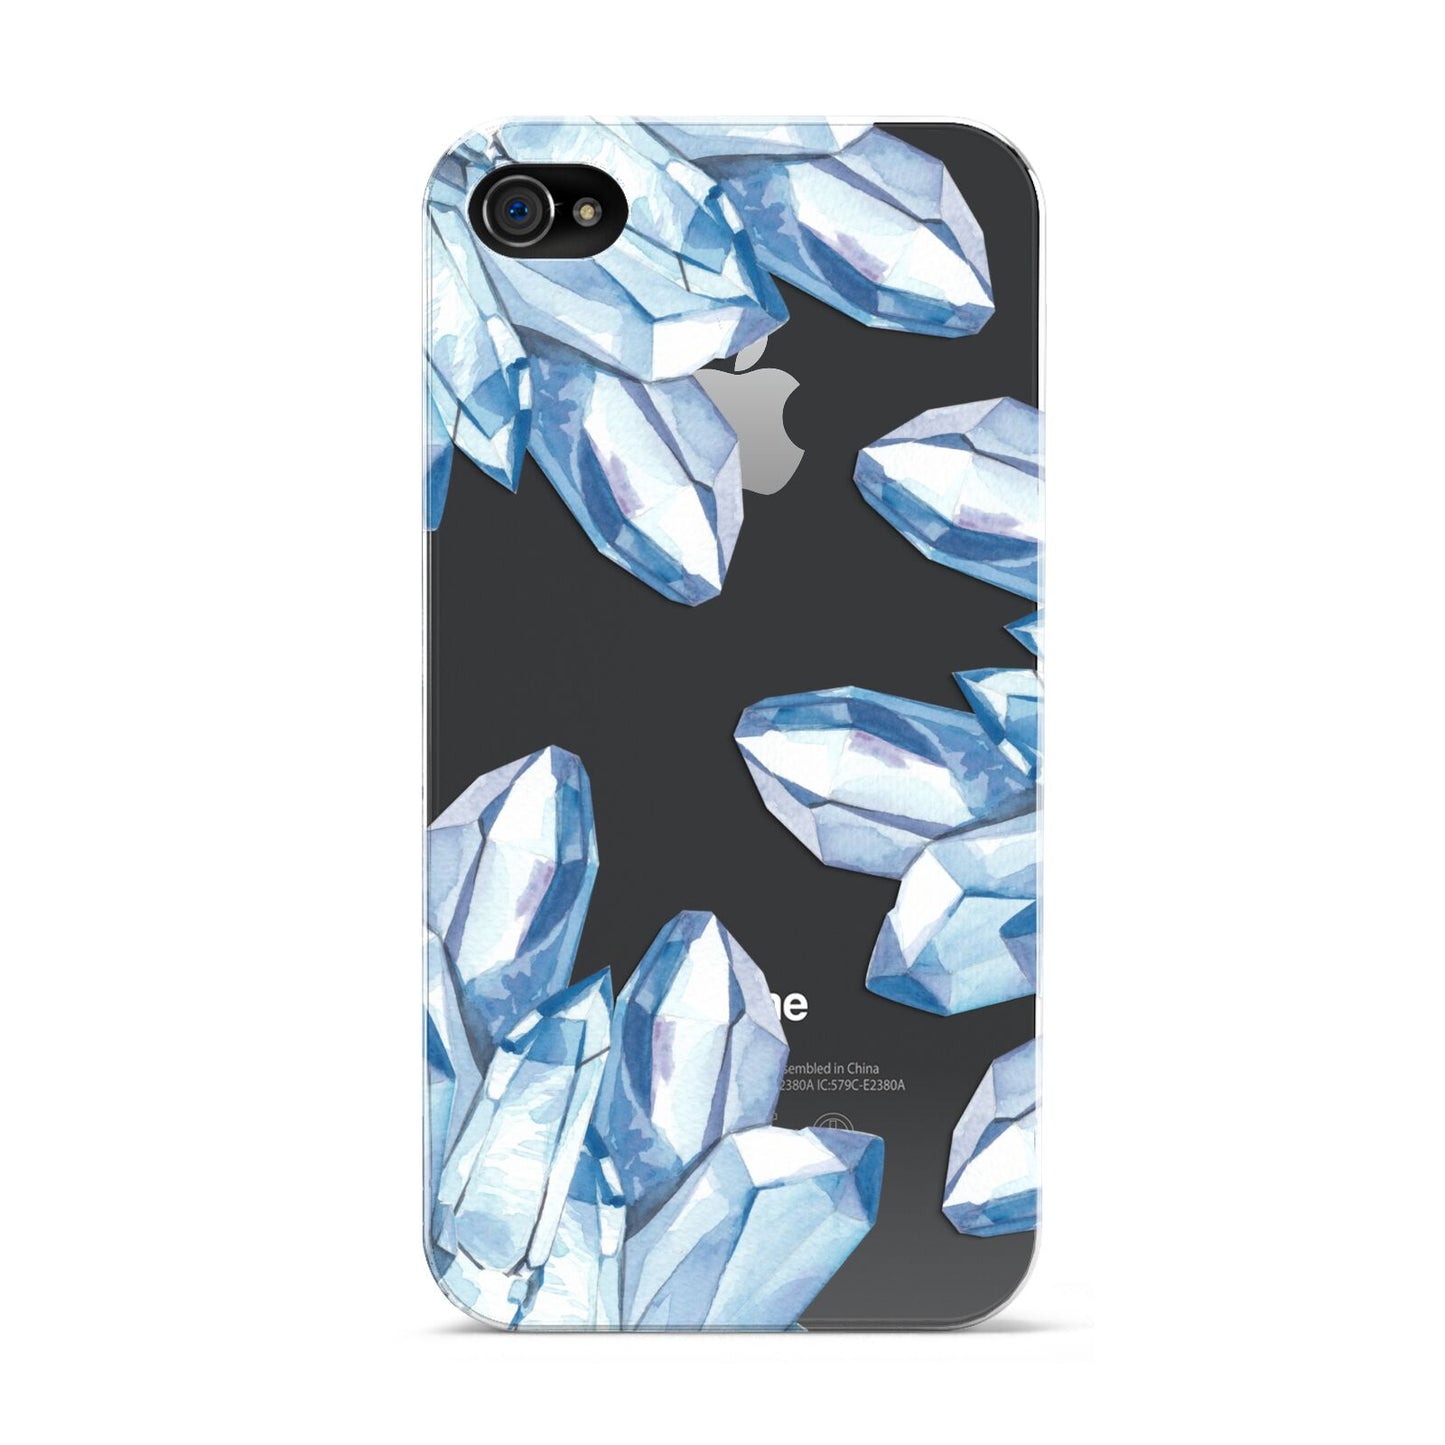 Blue Crystals Apple iPhone 4s Case